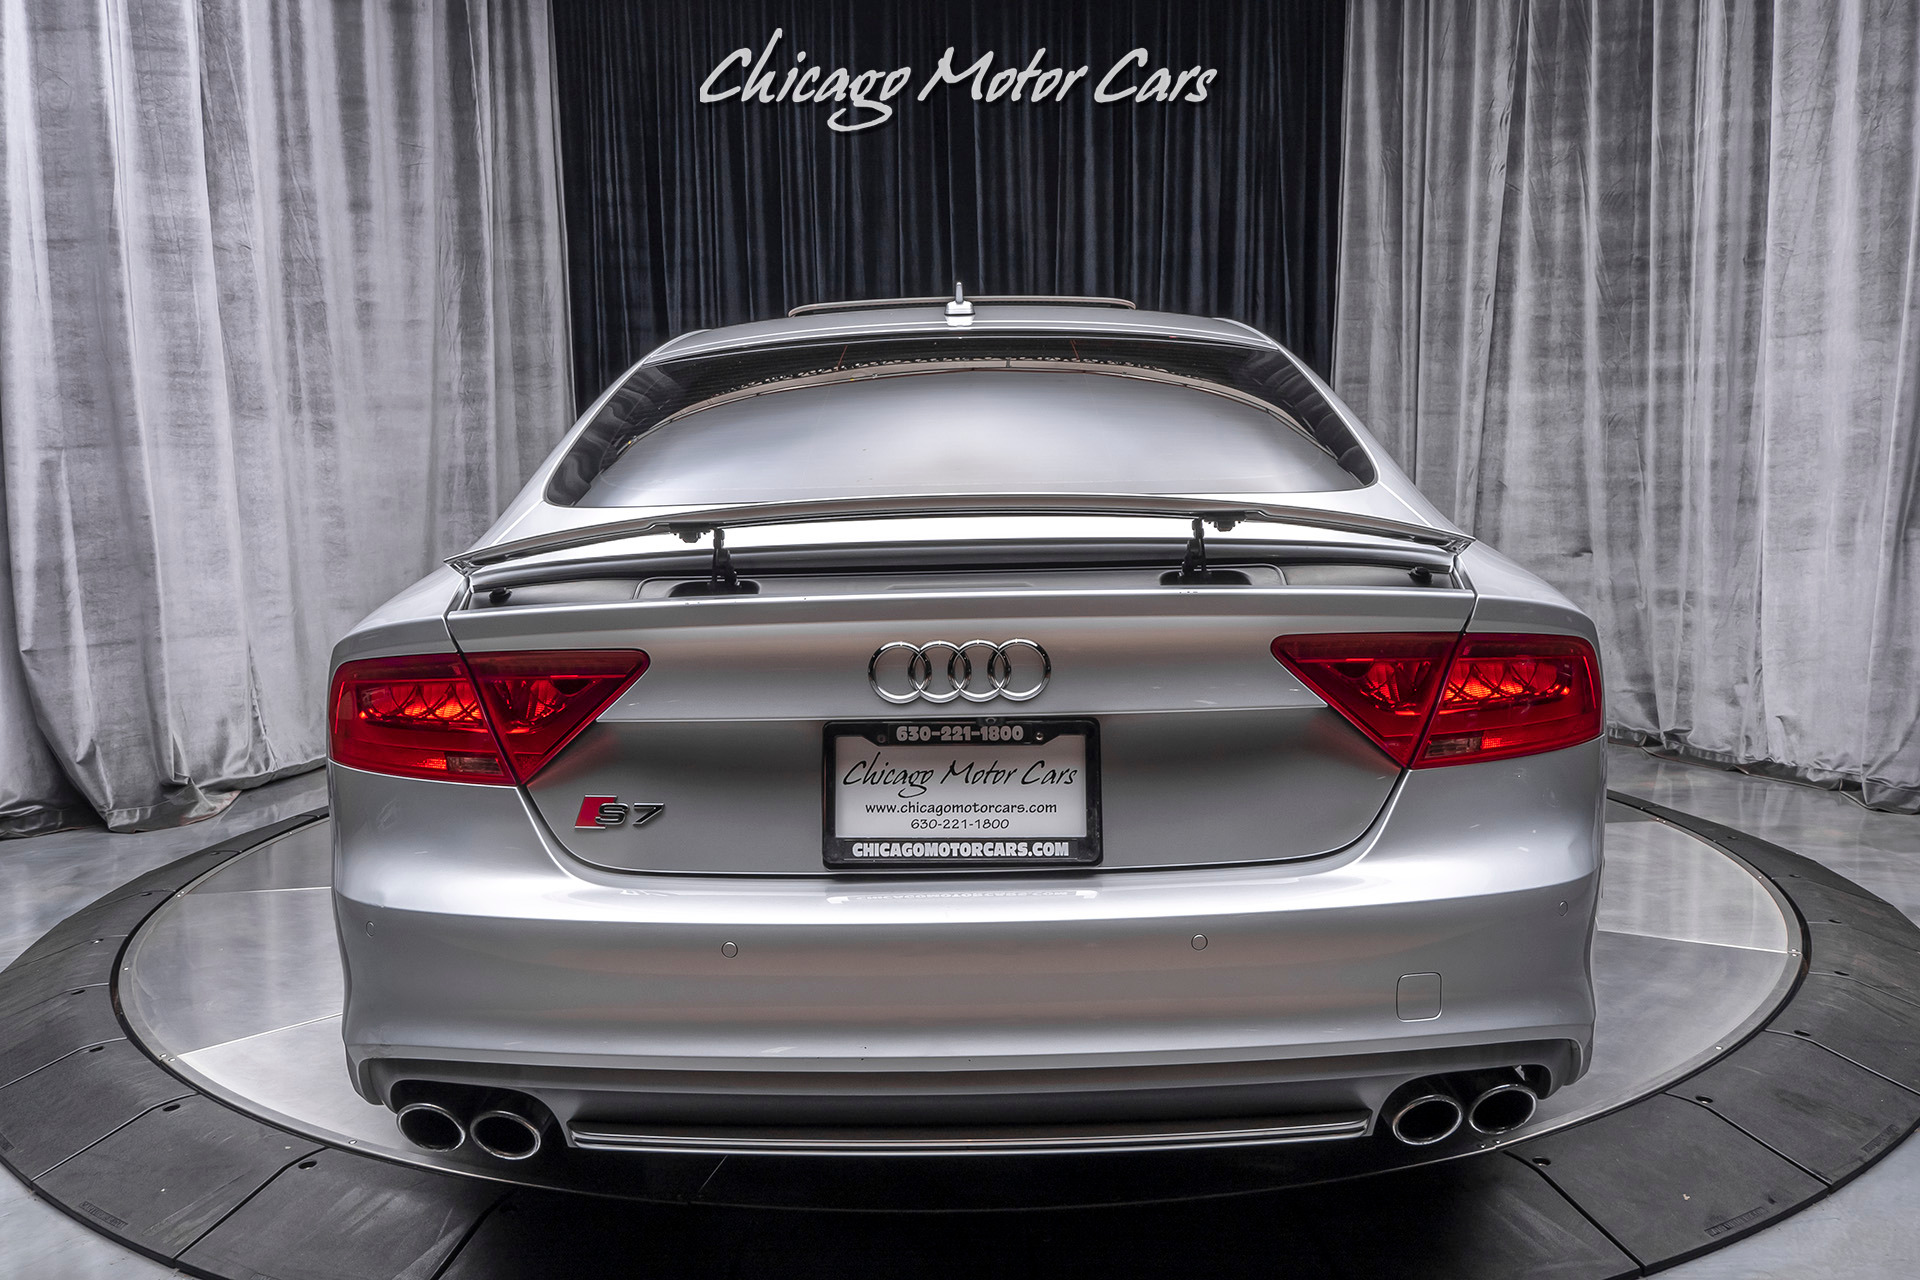 Used-2013-Audi-S7-quattro-S-tronic-Hatchback-MSRP-97K-INNOVATION-PACKAGE